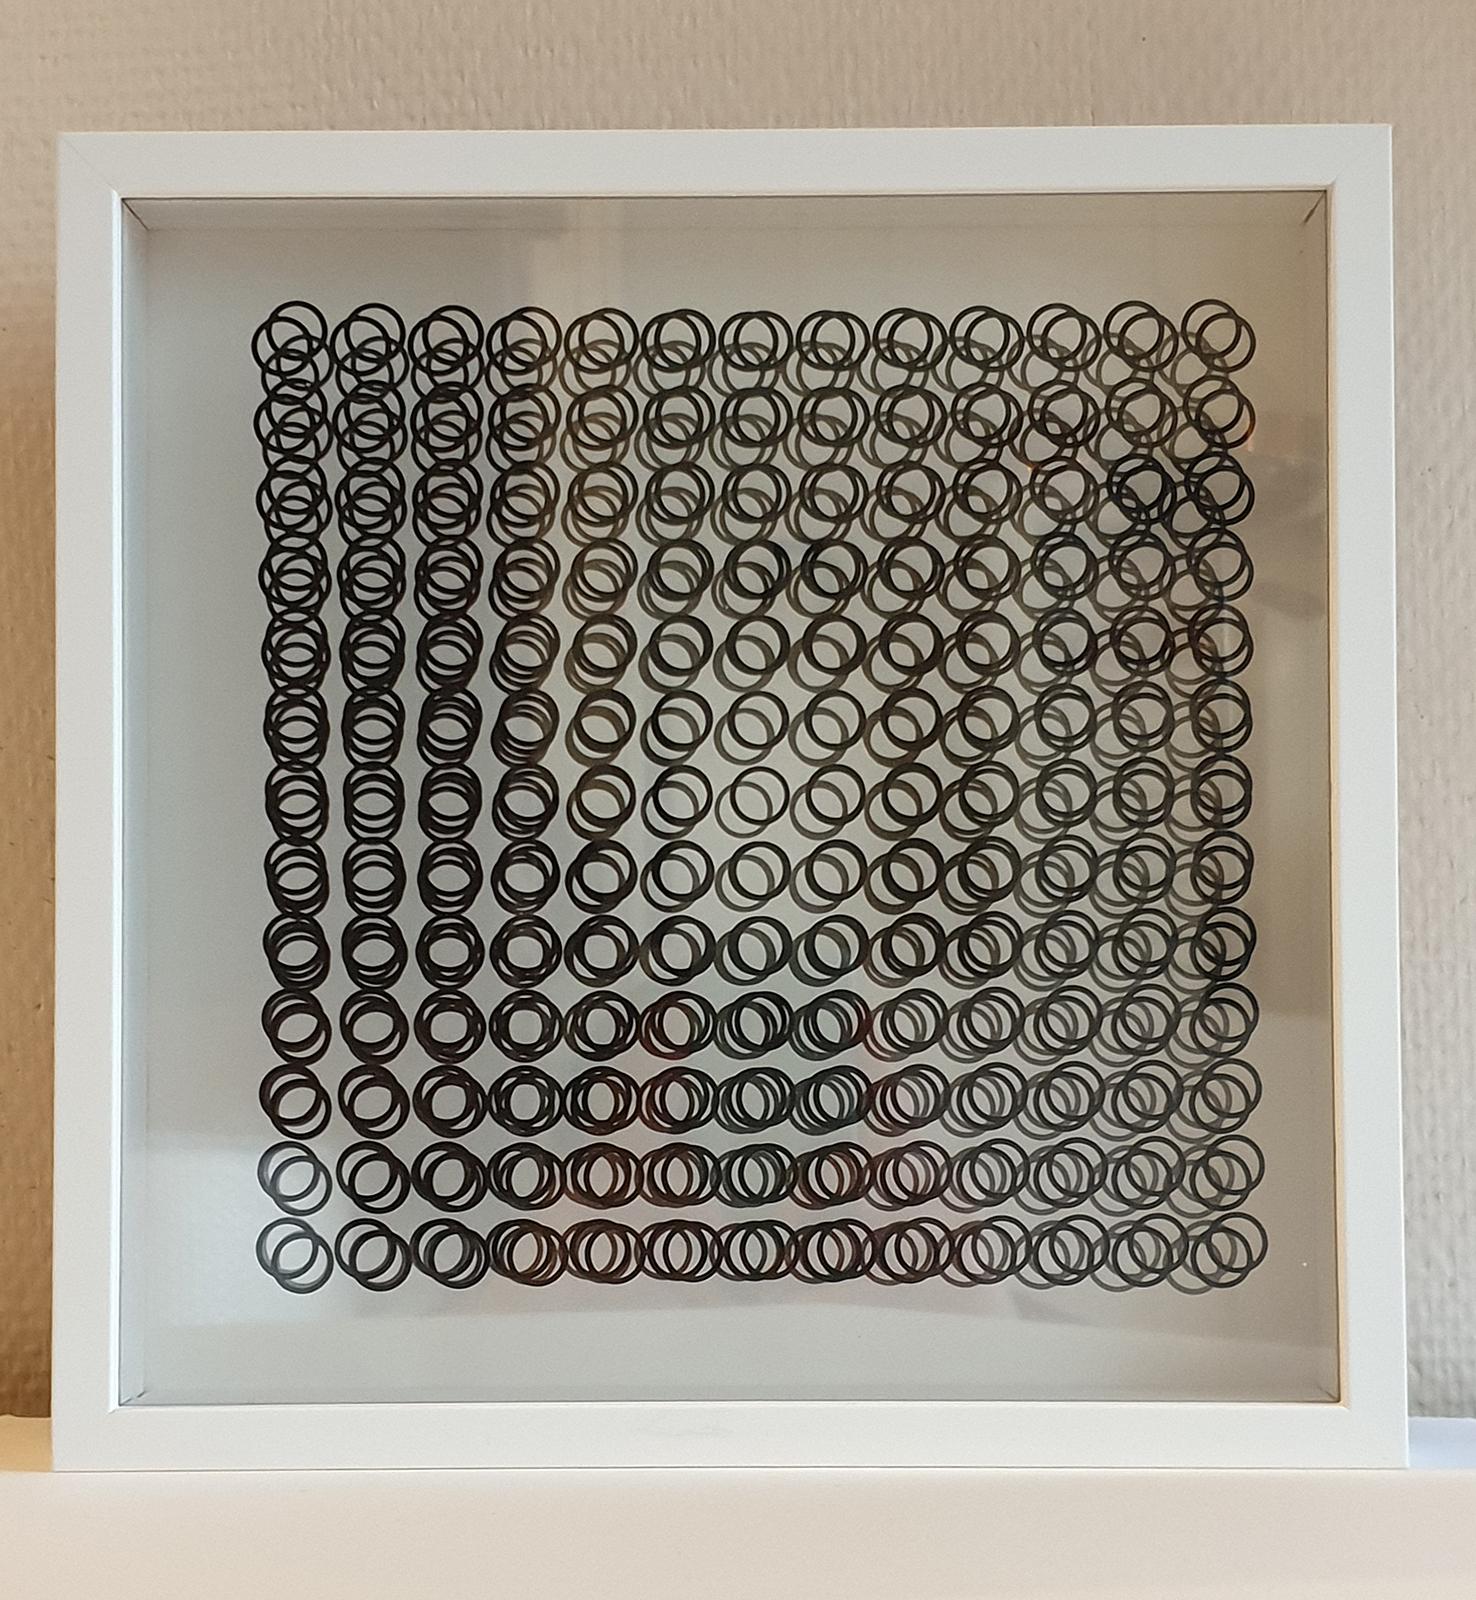 Victor Vasarely
Kinetics A

From serie : Kinetics A/ B/ C/ D
double screen print on rhodoid and cardboard
editions of the griffon
neuchatel (switzerland)
1st edition . 1973
white wood frame
perfect condition
very nice kinetic effect by superimposing